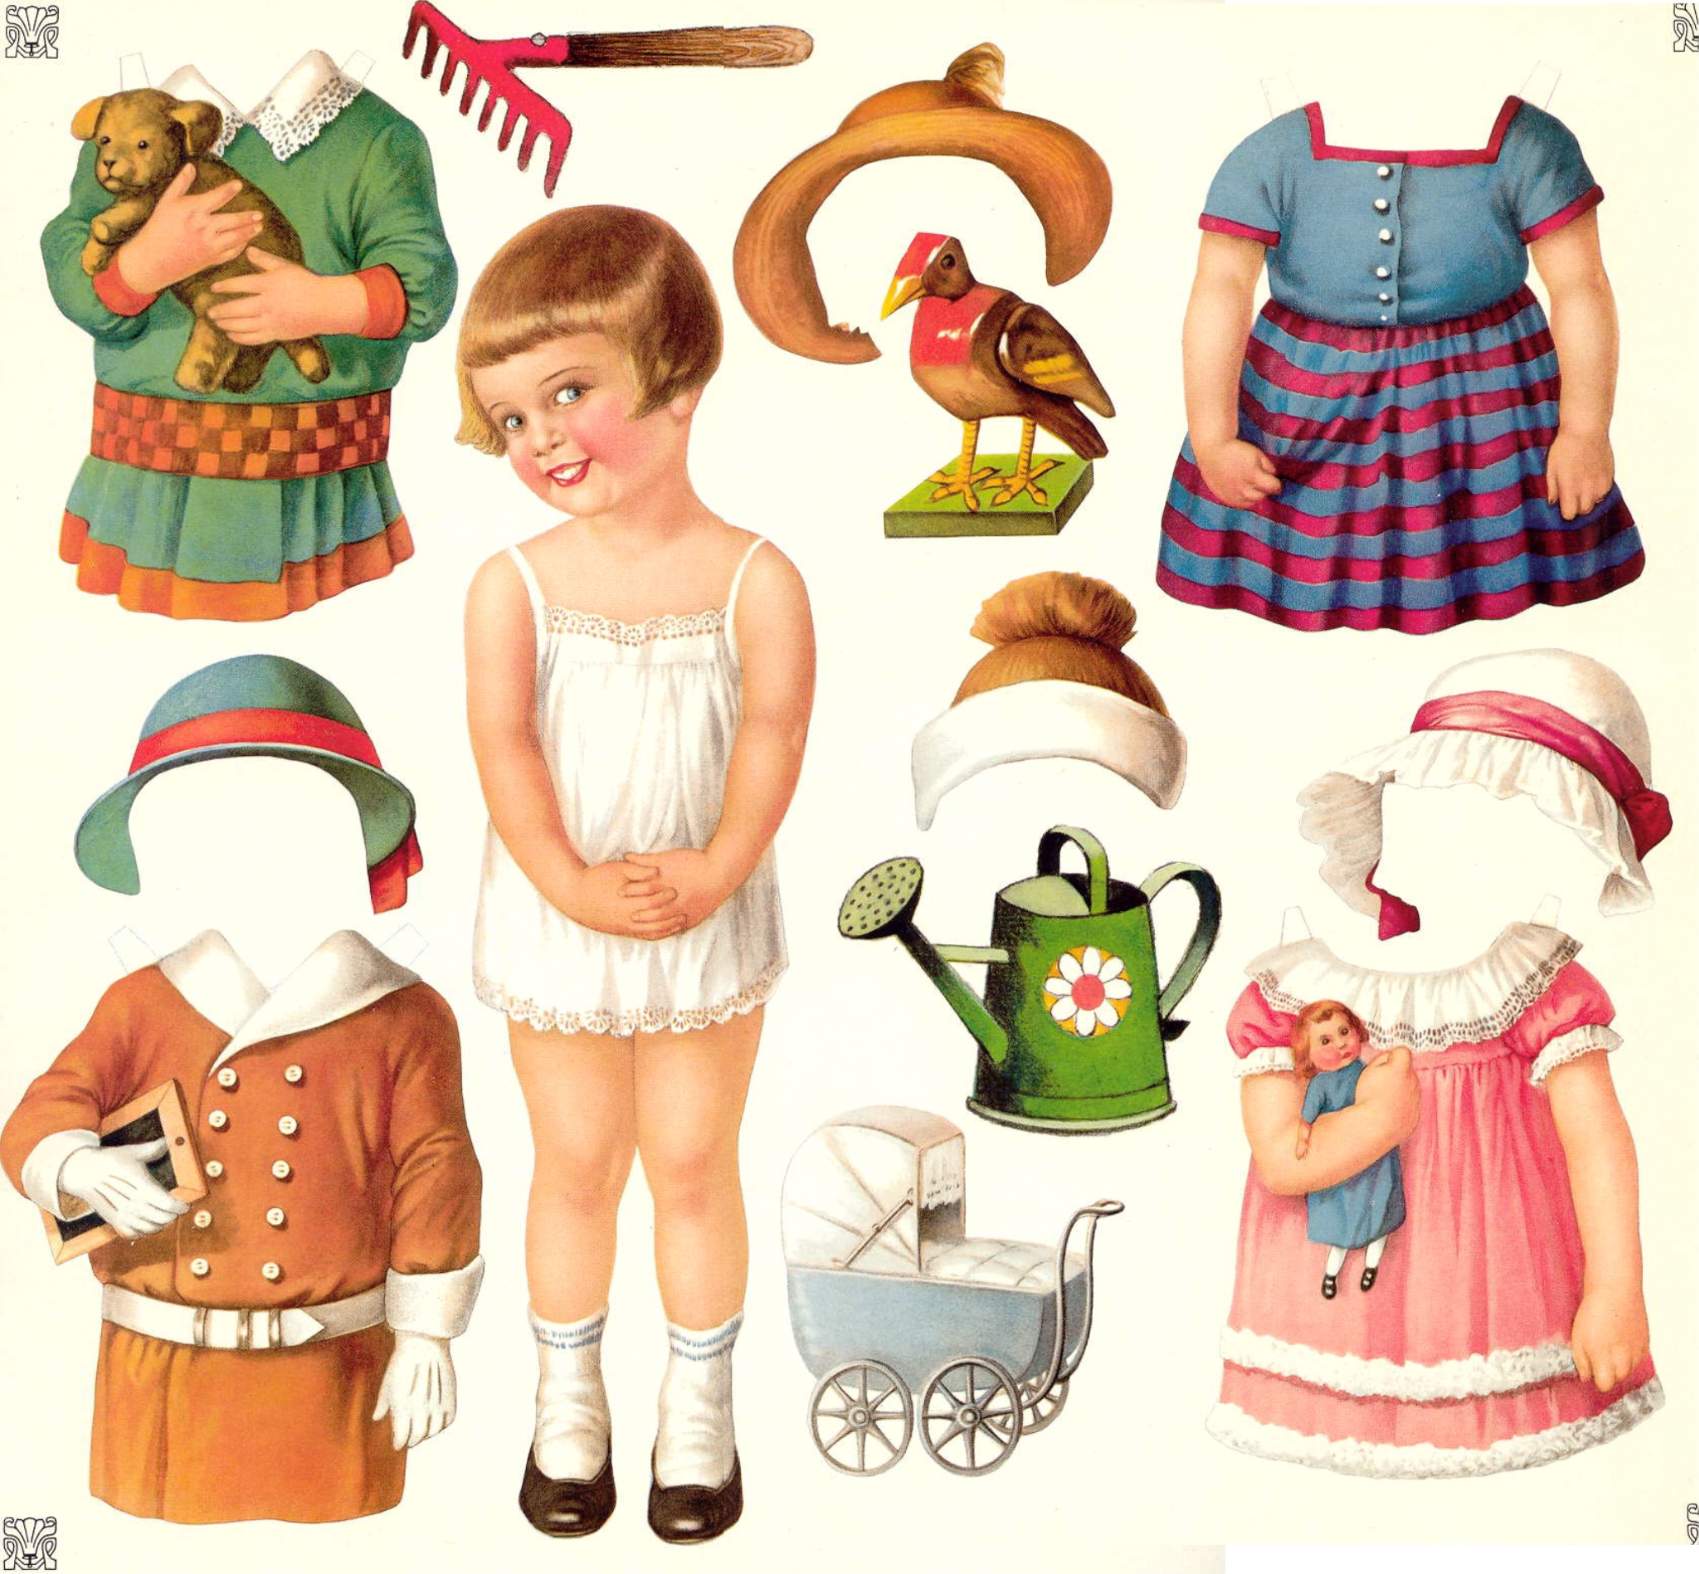 Vintage Dolls  At The Sugarsticks Website There Are Some Beautiful    